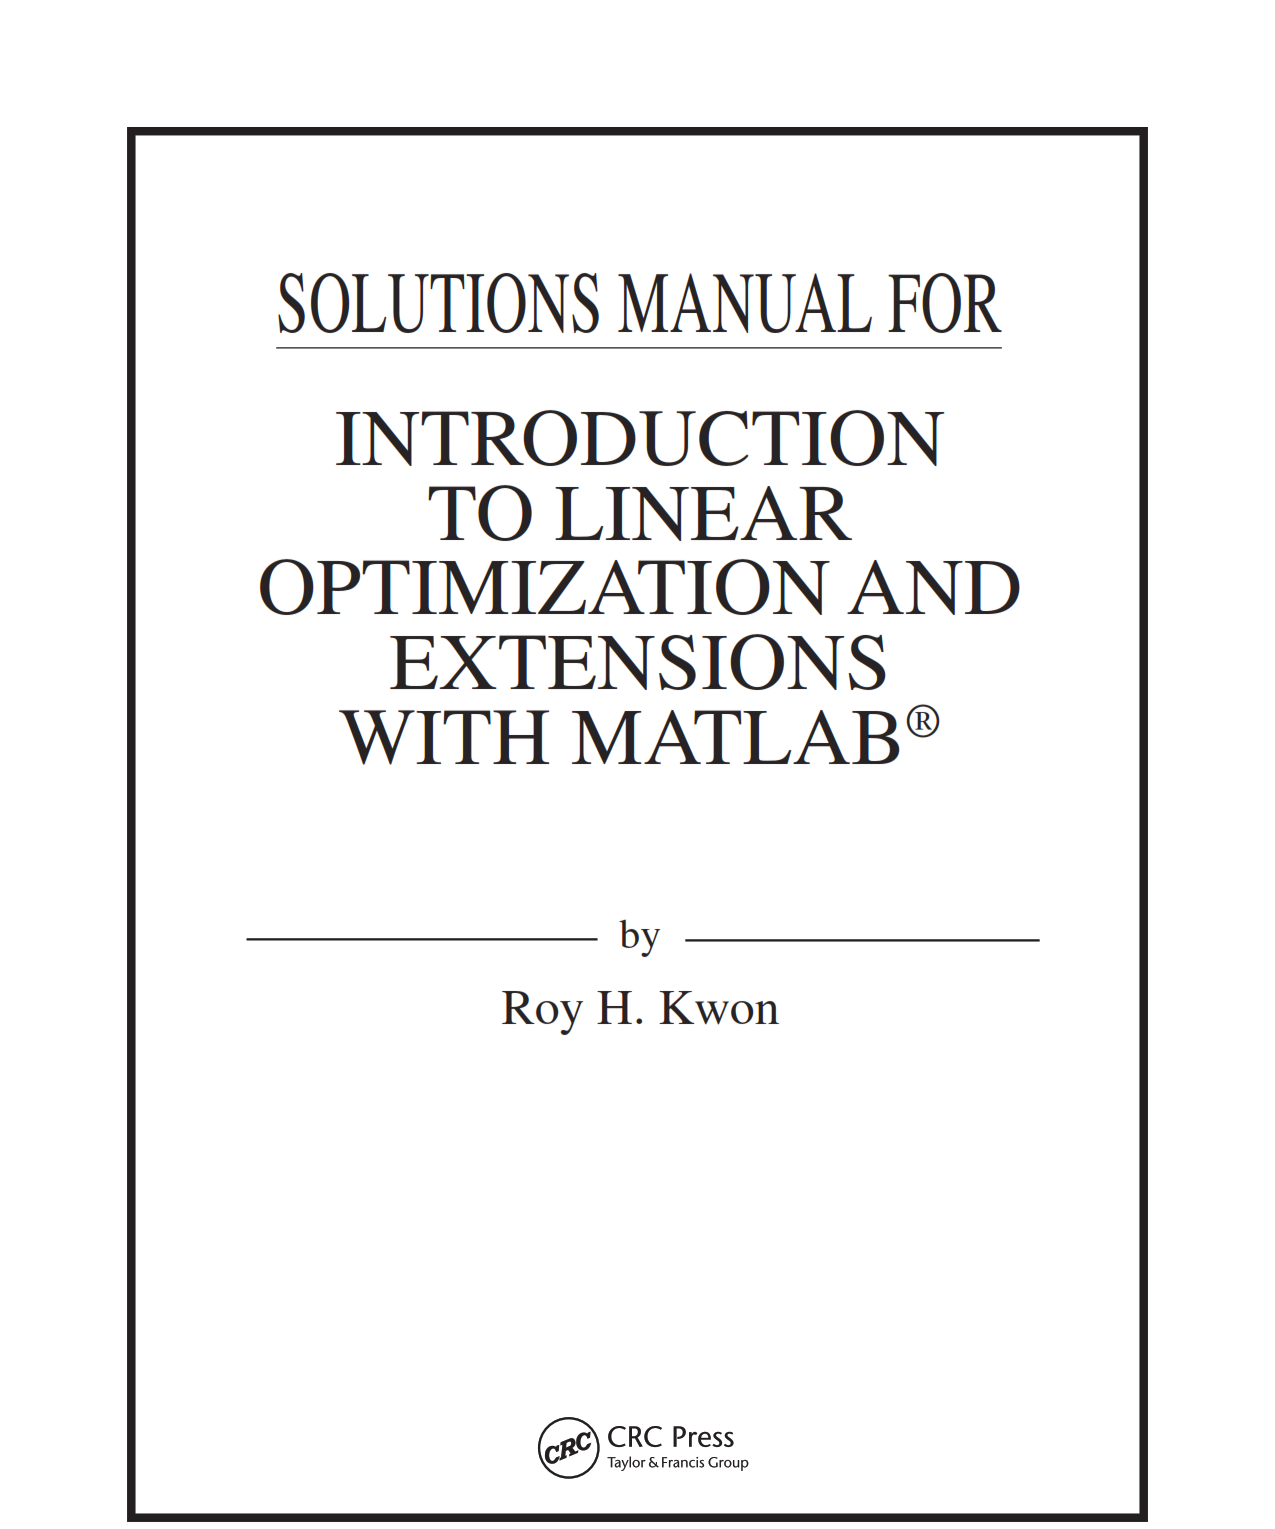 Download free Introduction to Linear Optimization and Extensions with MATLAB Roy H. Kwon 1st edition solution manual pdf | gioumeh solutions